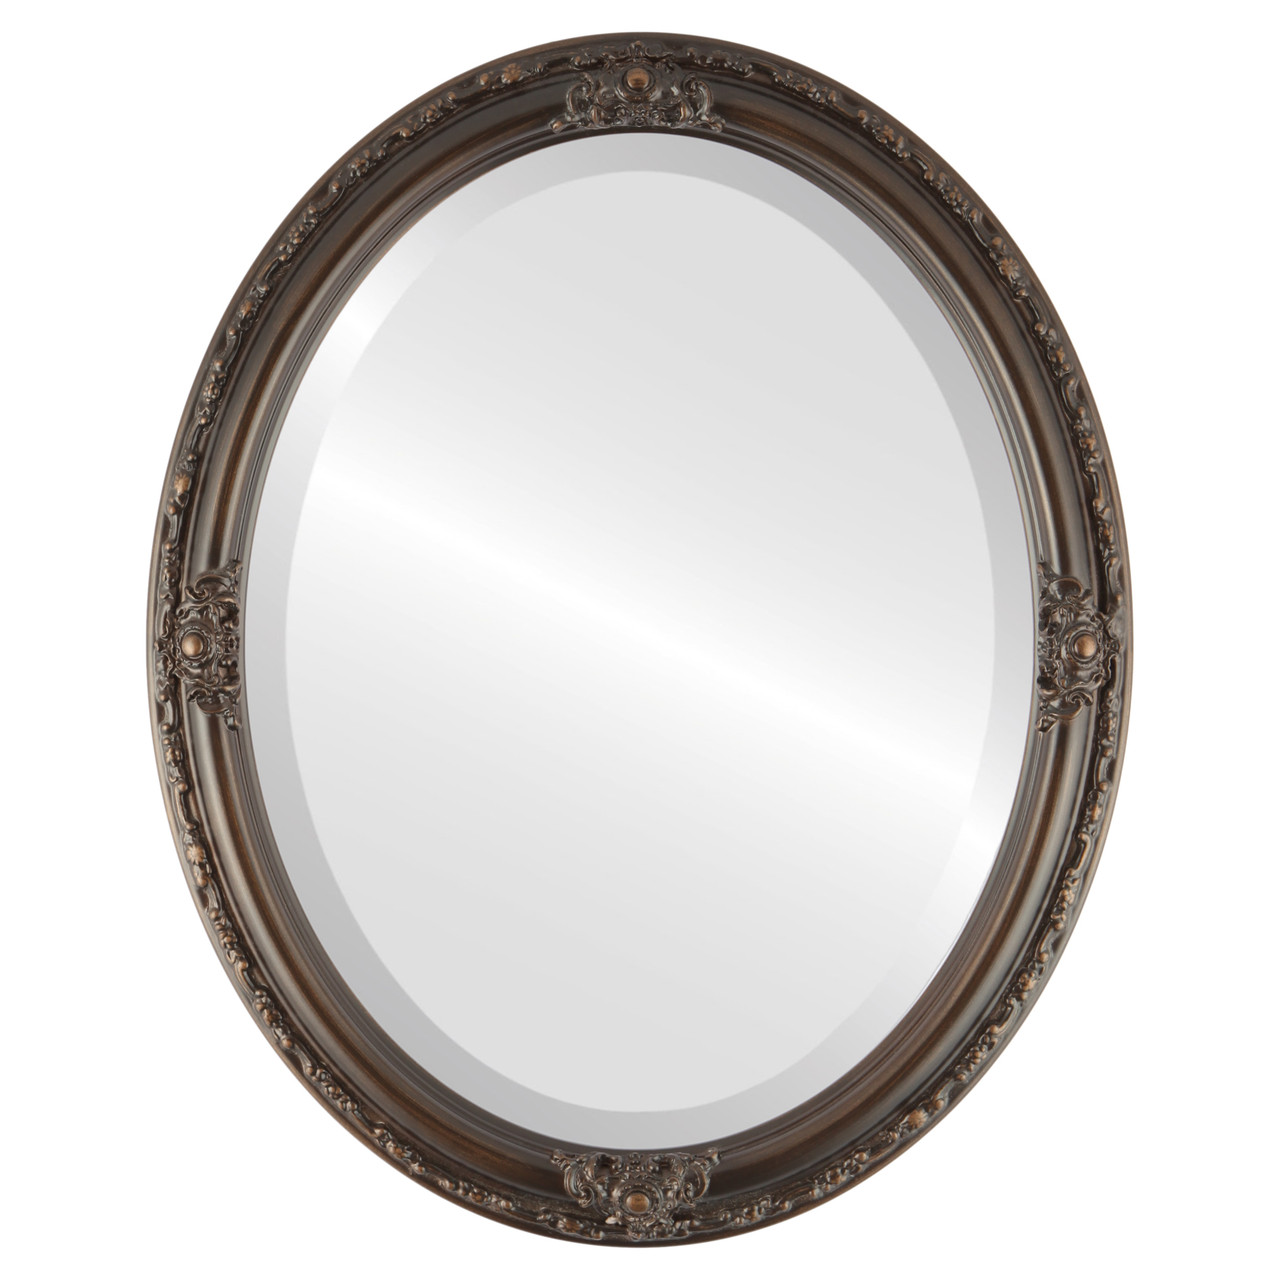 Oval Beveled Wall Mirror for Home Decor Florence Style Rubbed Bronze - 1